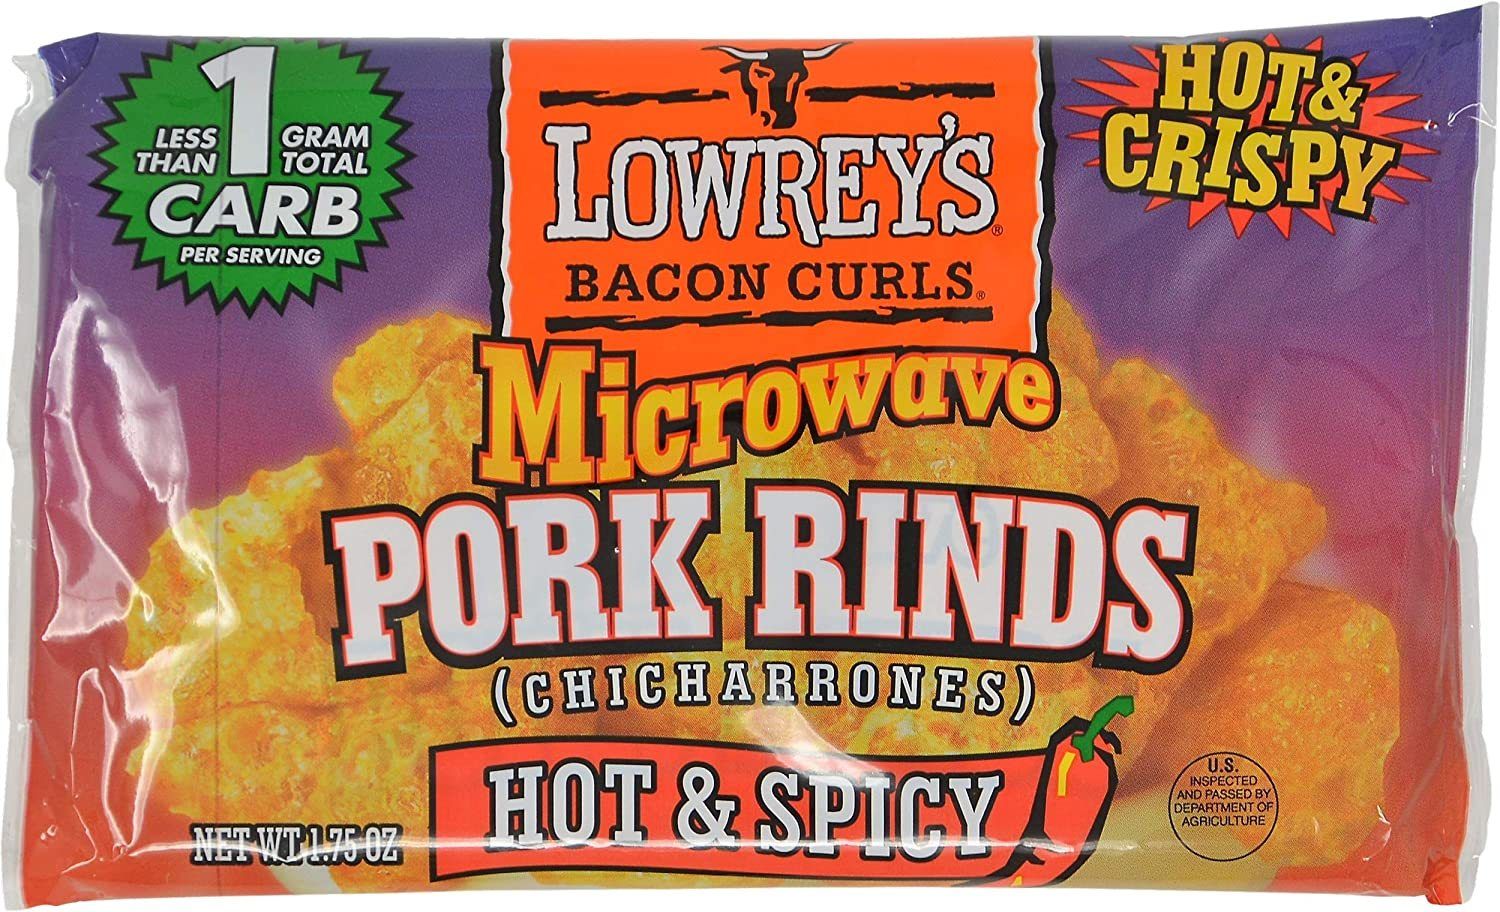 Lowrey's Bacon Curls Microwave Pork Rinds (Chicharrones) Lowrey's Hot & Spicy 1.75 Ounce 